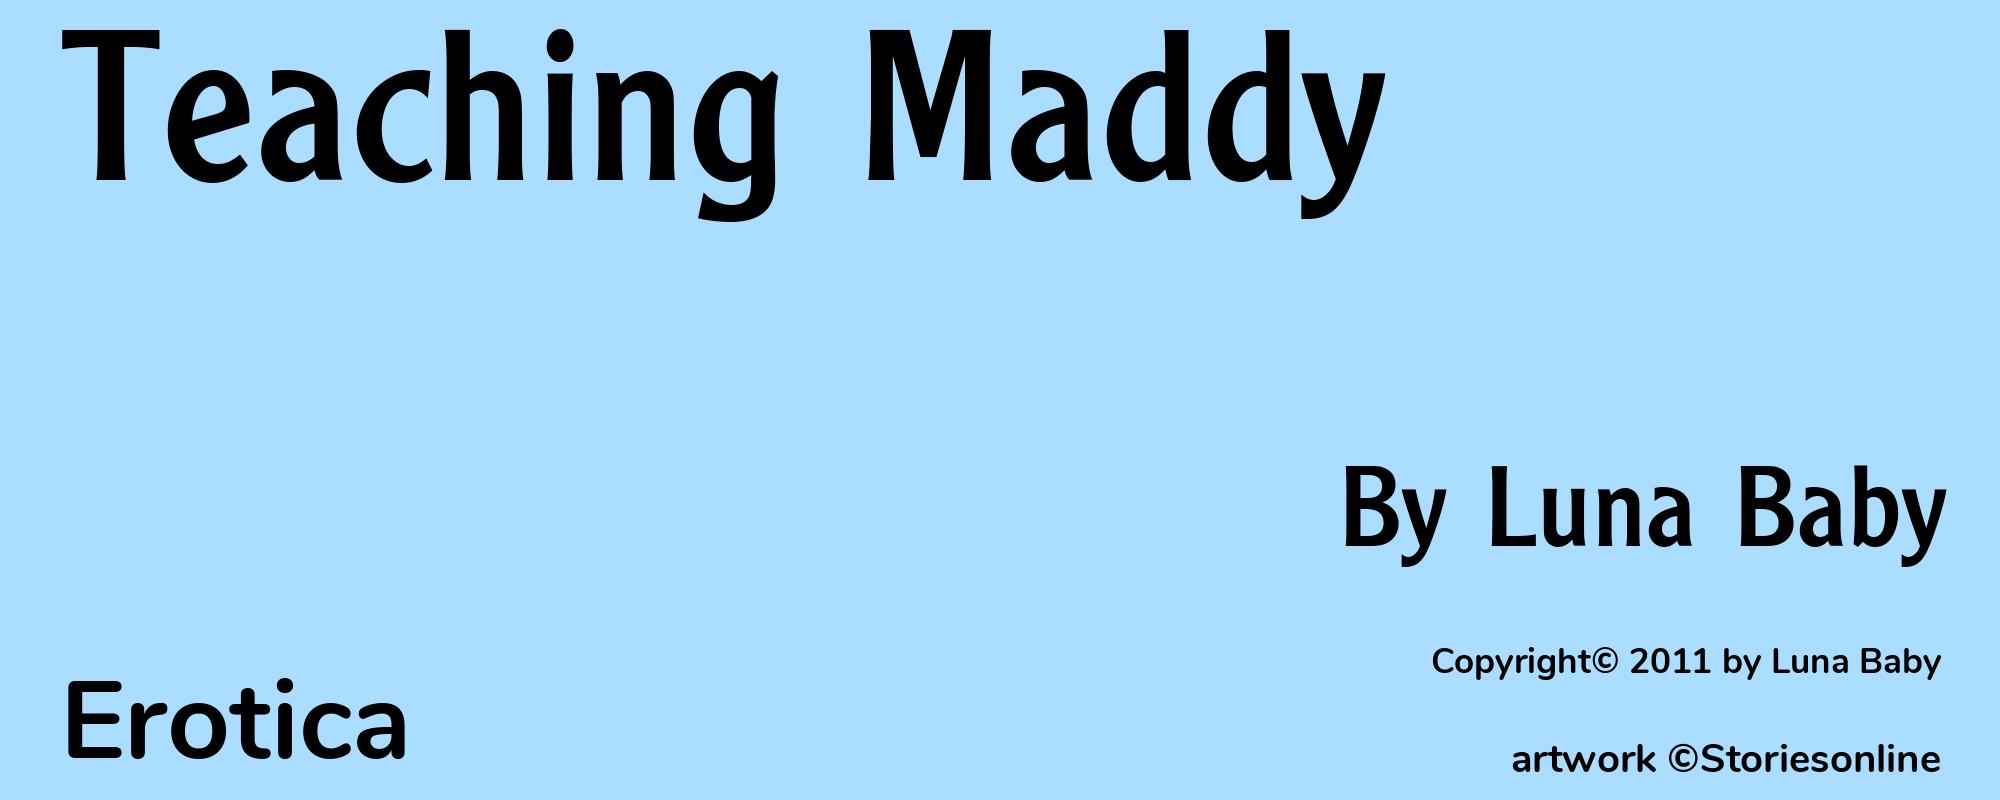 Teaching Maddy - Cover